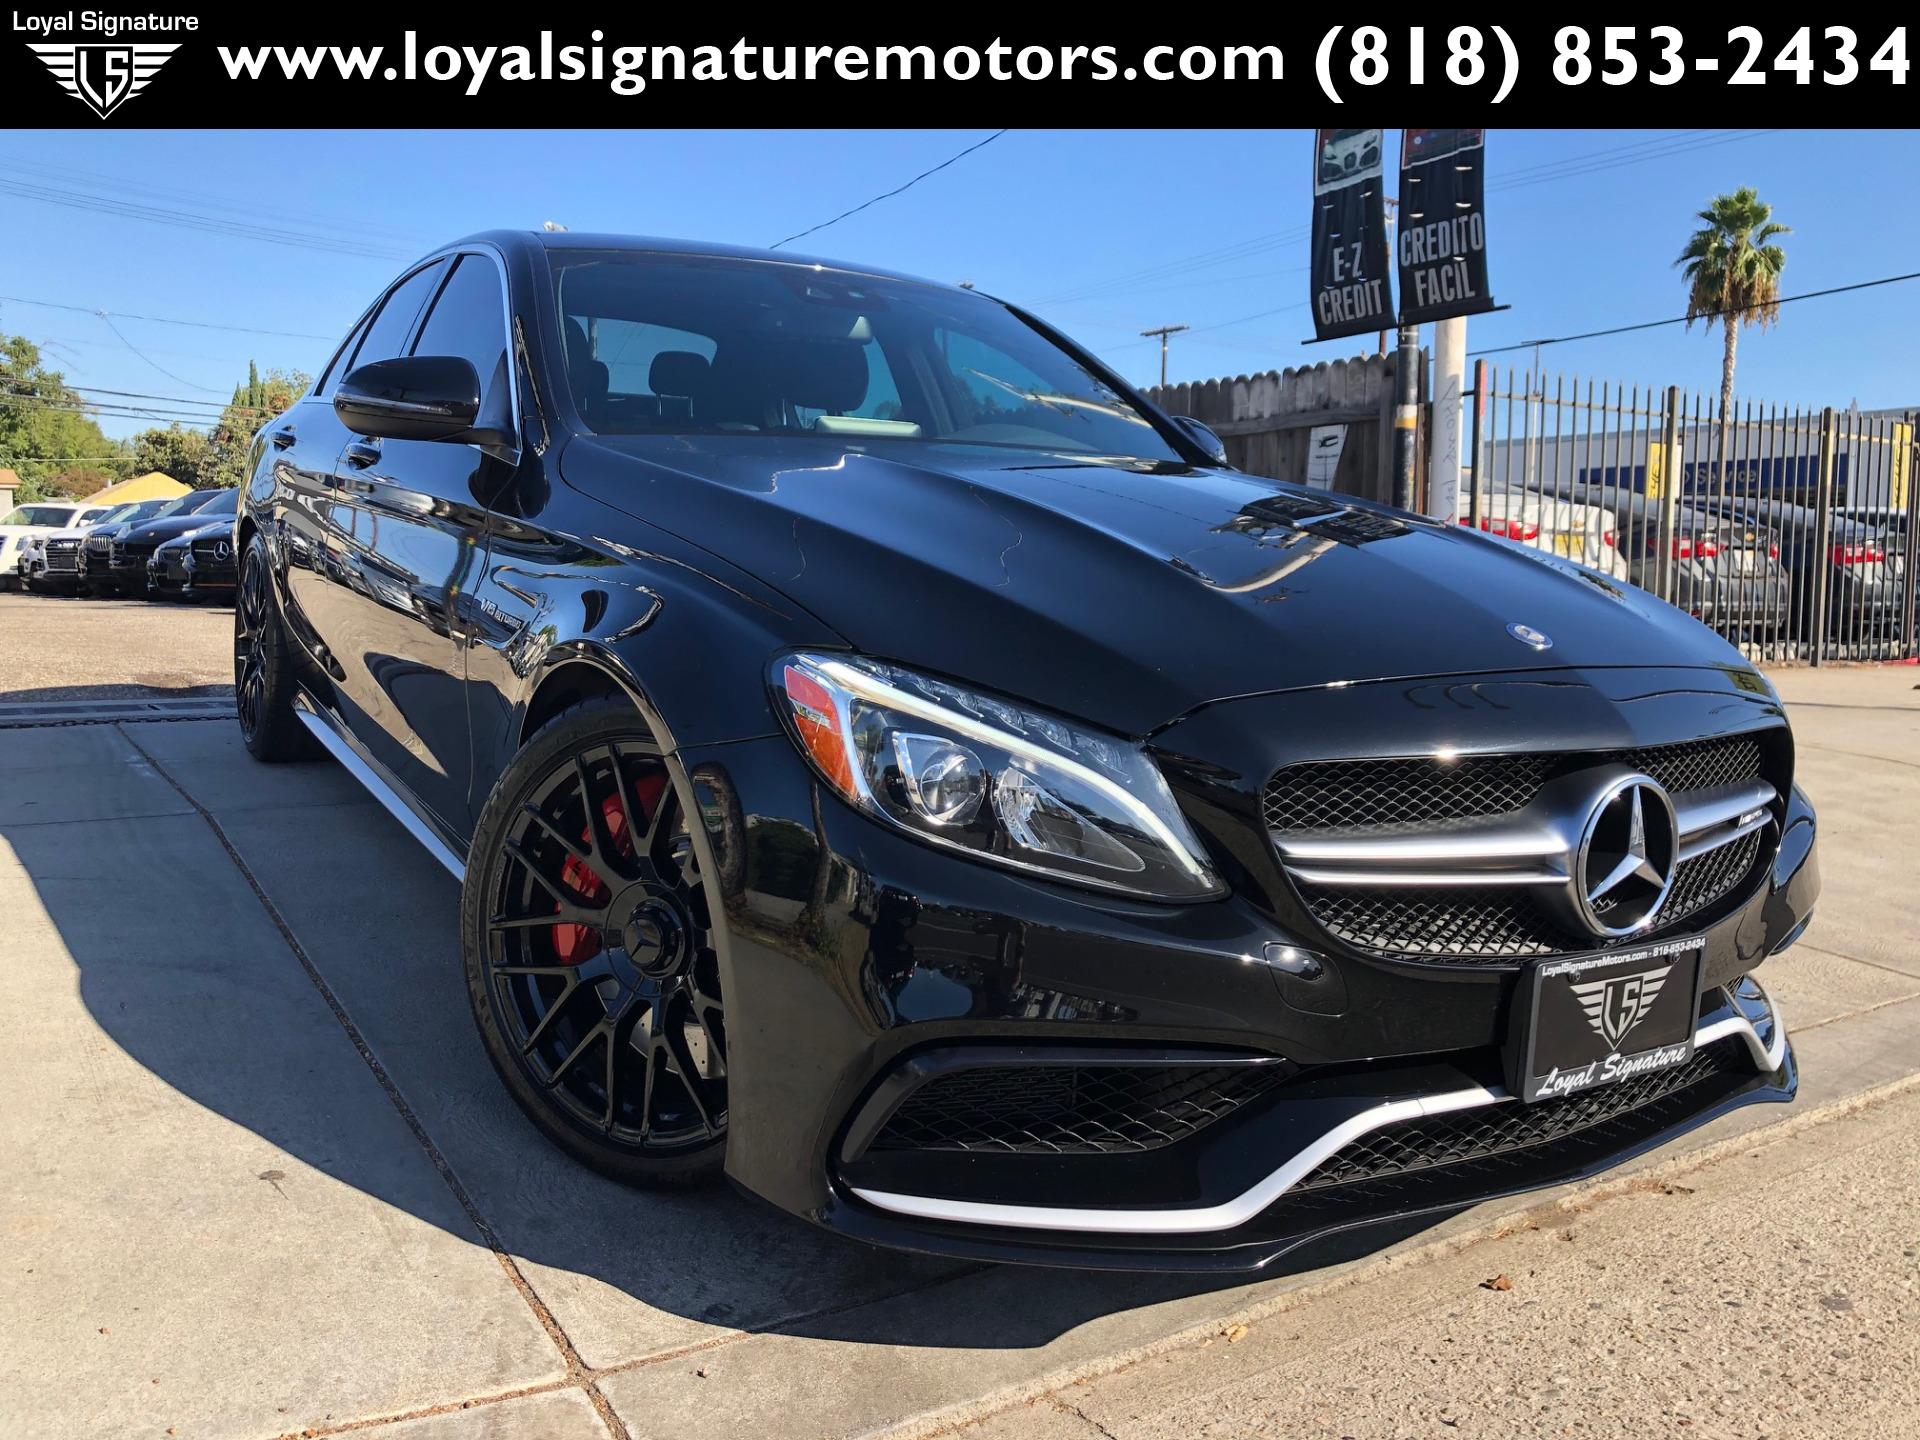 Used 17 Mercedes Benz C Class Amg C 63 S For Sale 49 995 Loyal Signature Motors Inc Stock